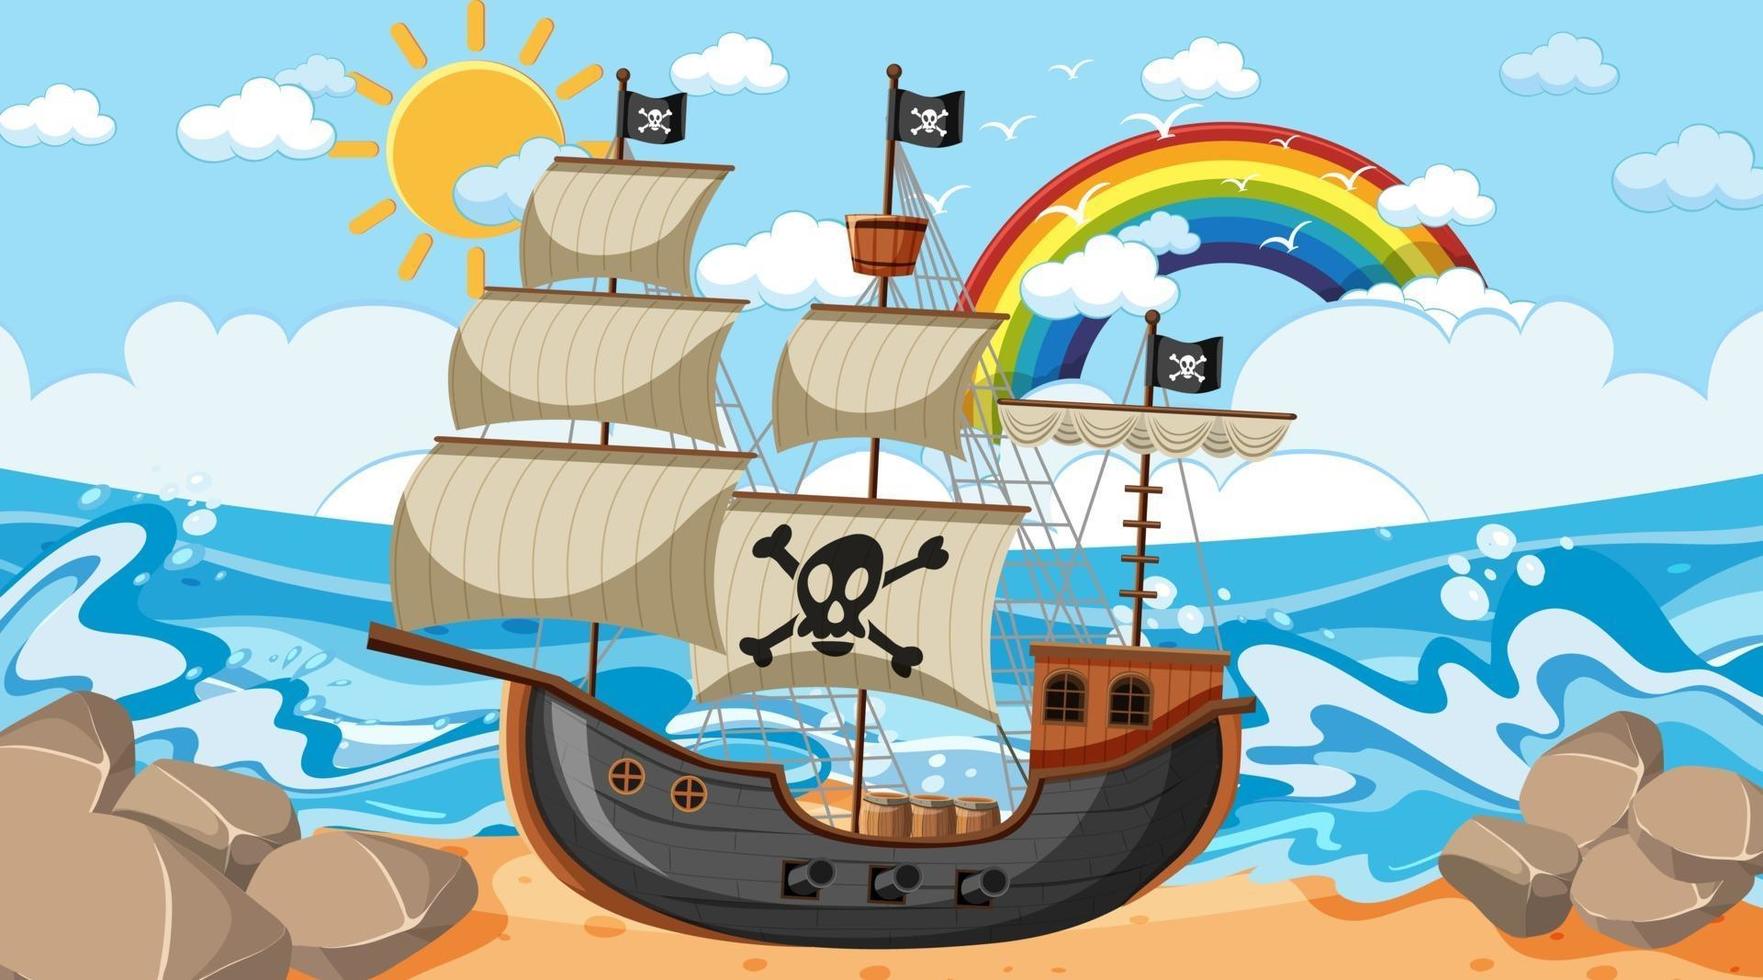 Ocean scene at day time with Pirate ship in cartoon style vector